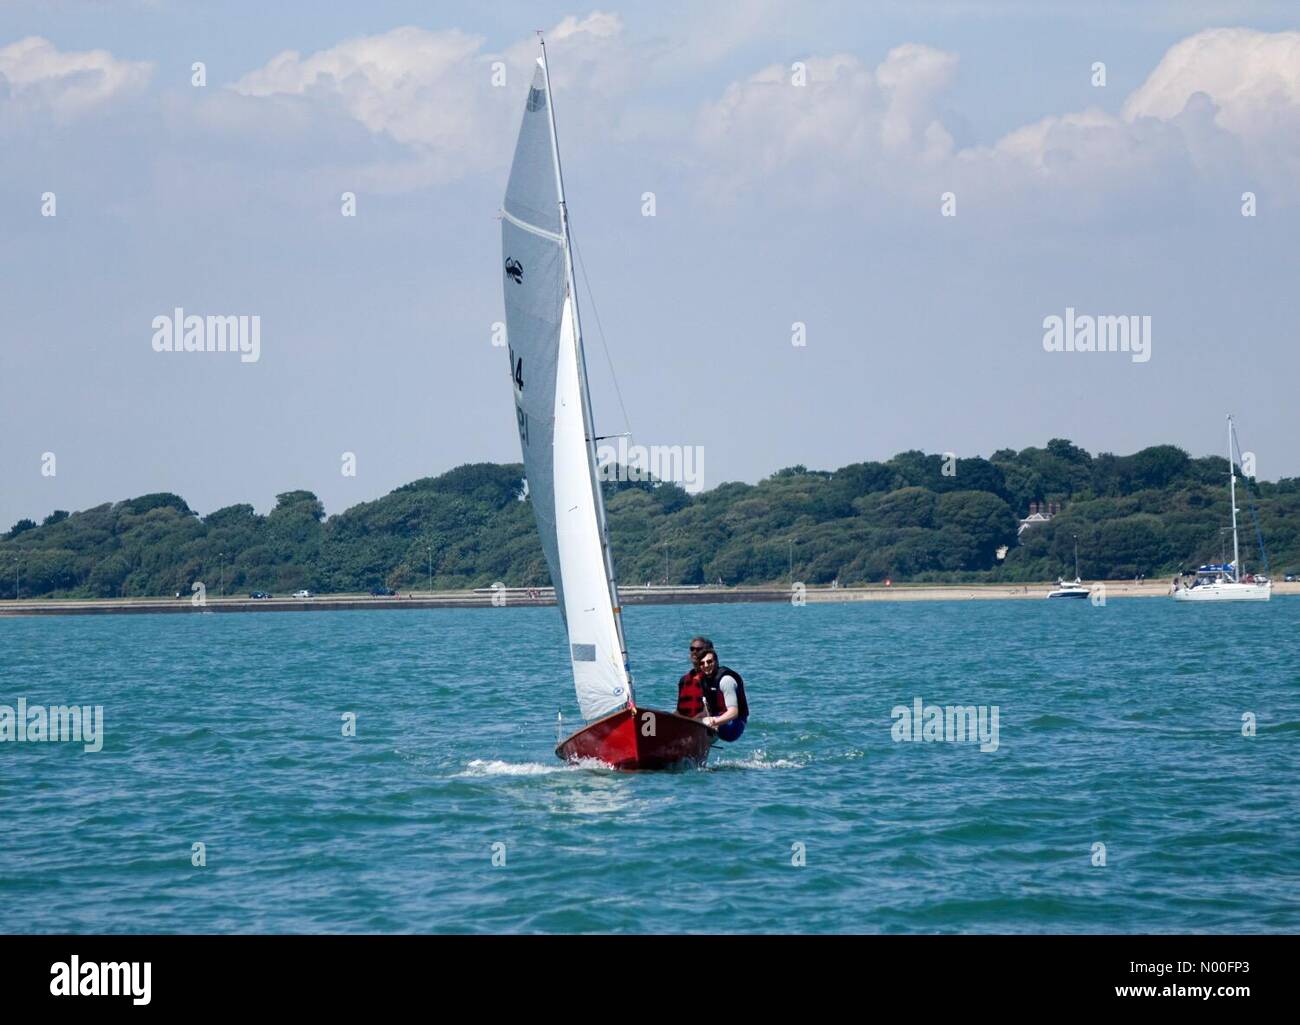 Portsmouth, UK. 9th Jul, 2017. UK Weather: Sunny on the Solent. Portsmouth, Hants. 09th July 2017. High pressure anticyclonic conditions brought sunny weather to the south coast today. Sailing off Portsmouth in Hampshire. Credit: jamesjagger/StockimoNews/Alamy Live News Stock Photo